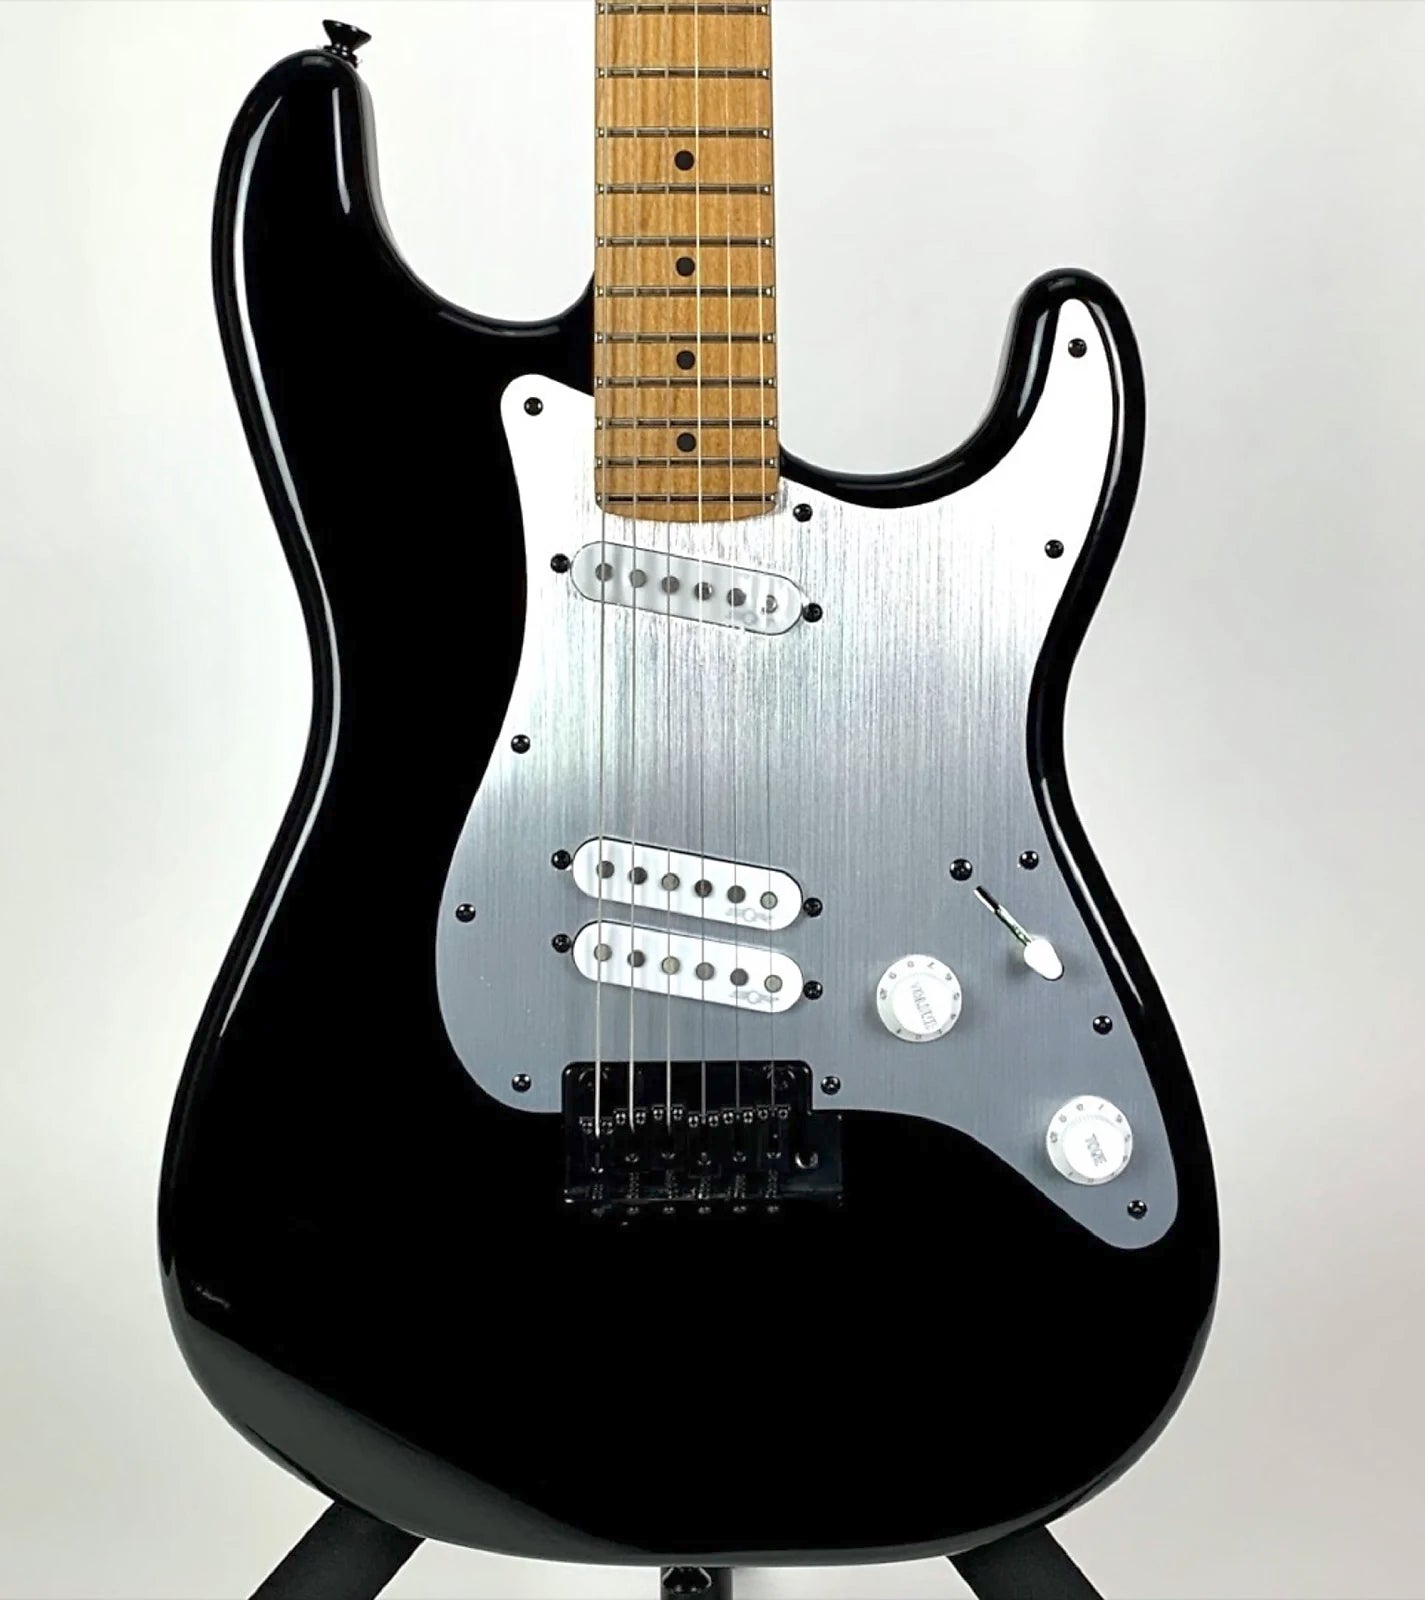 USED Squier Contempoary Stratocaster Special with Roasted Maple Fingerboard - Black